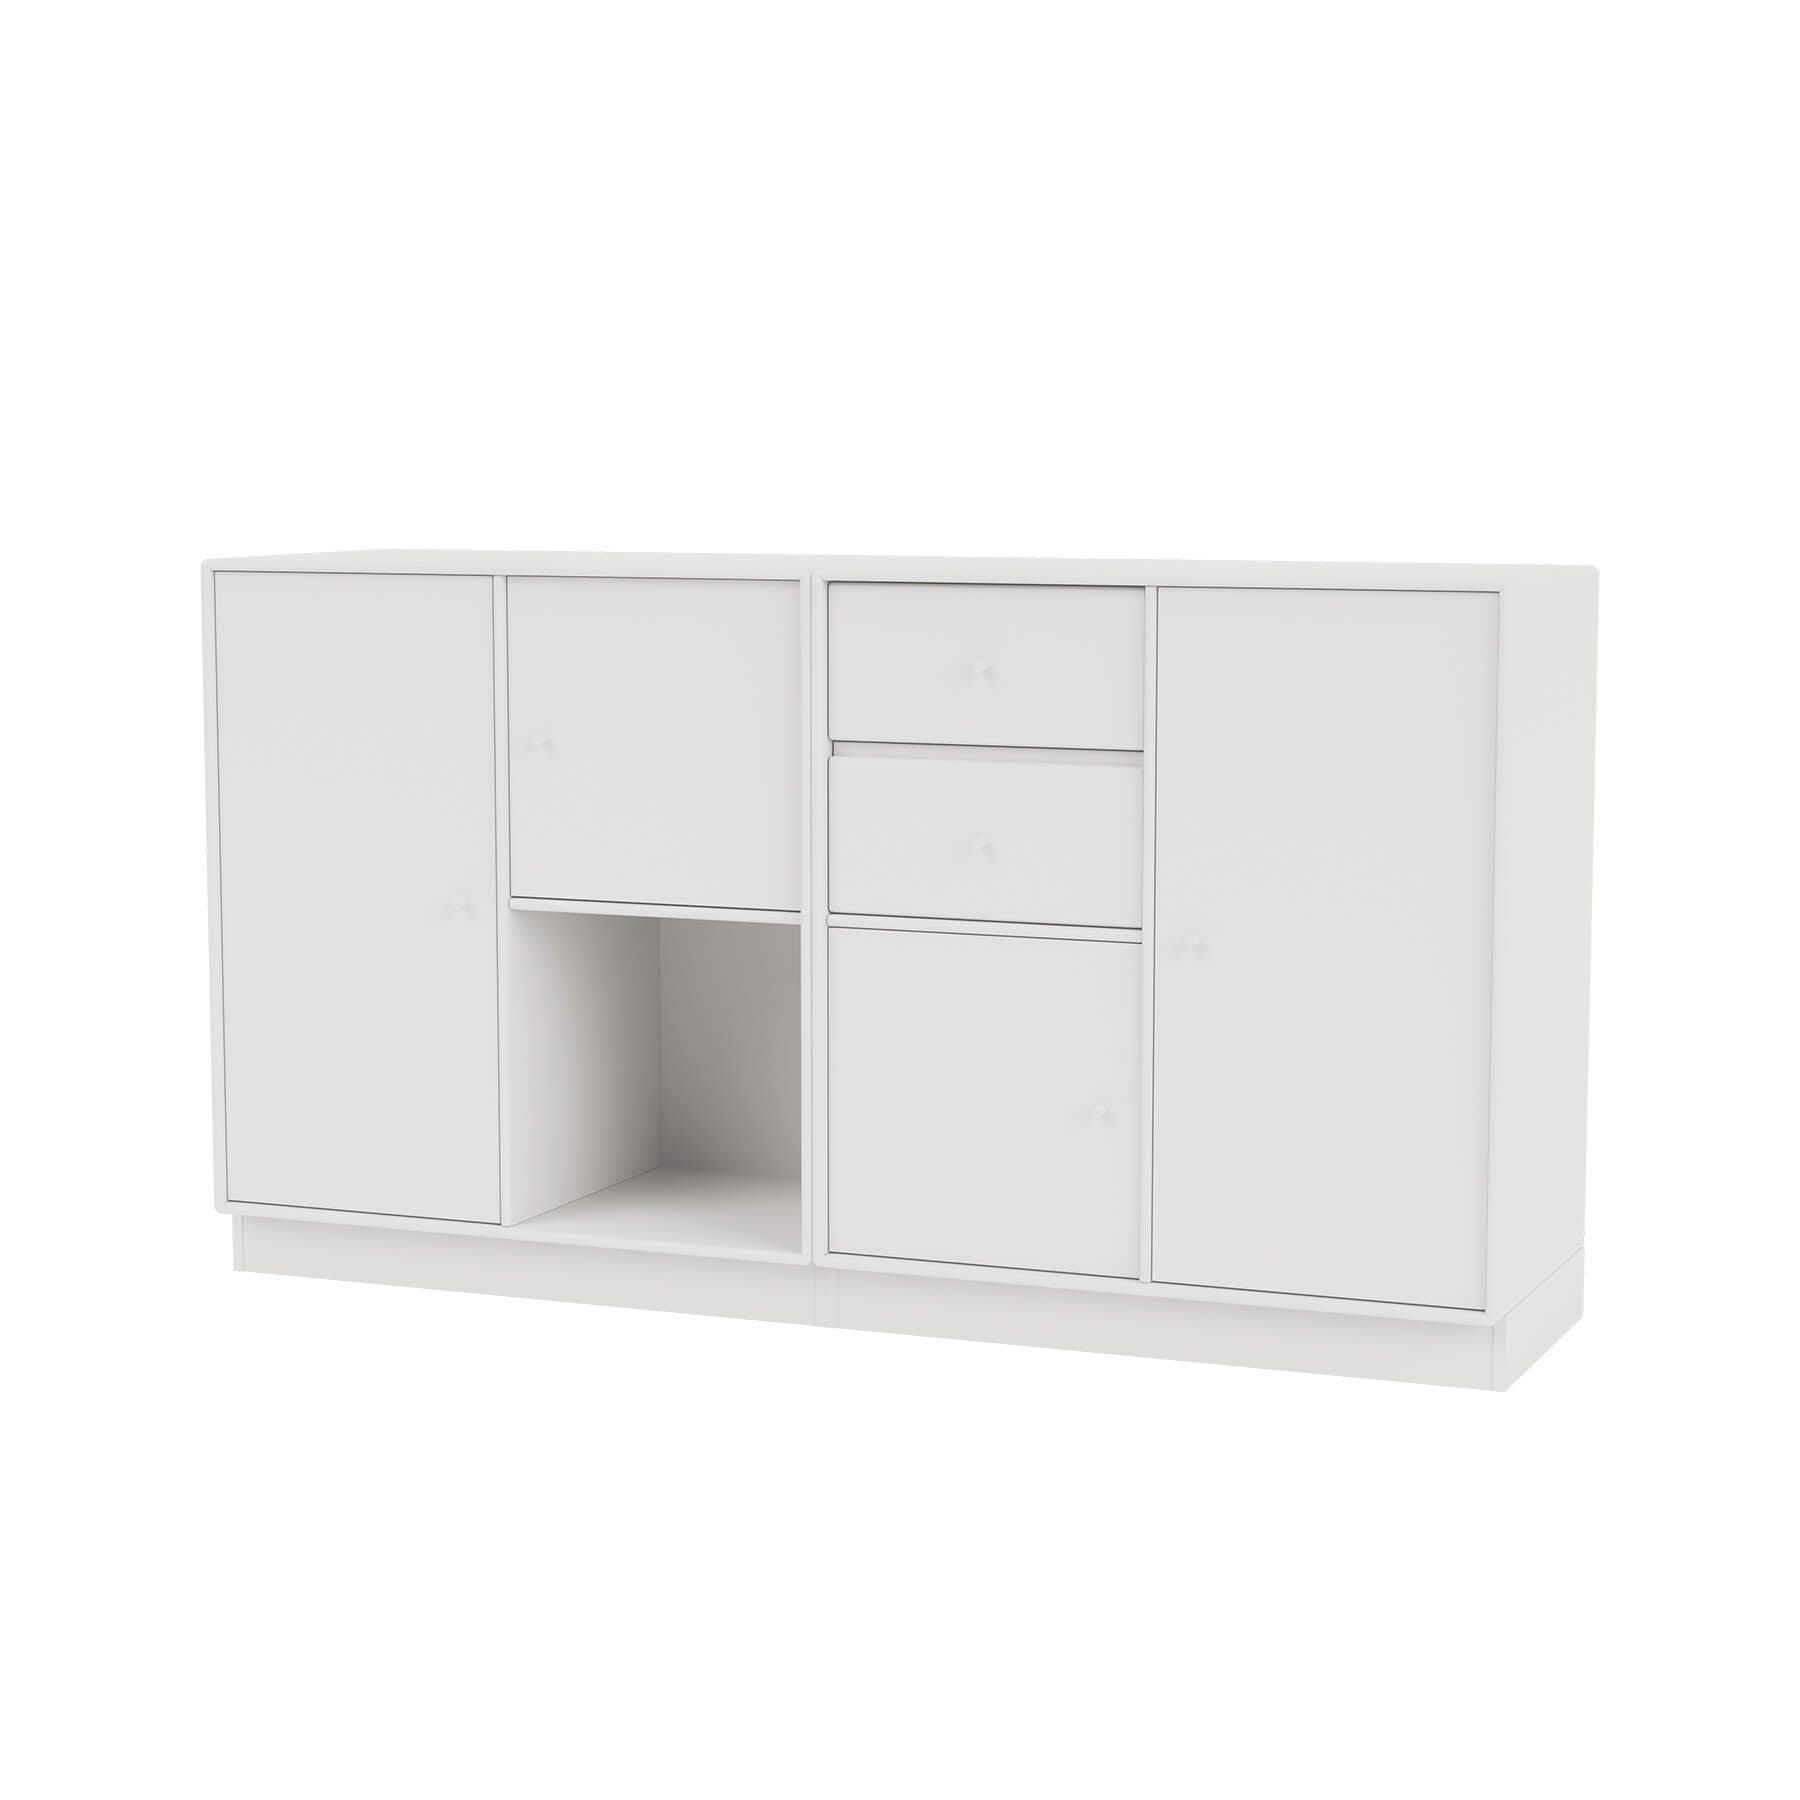 Montana Couple Sideboard White Plinth White Designer Furniture From Holloways Of Ludlow